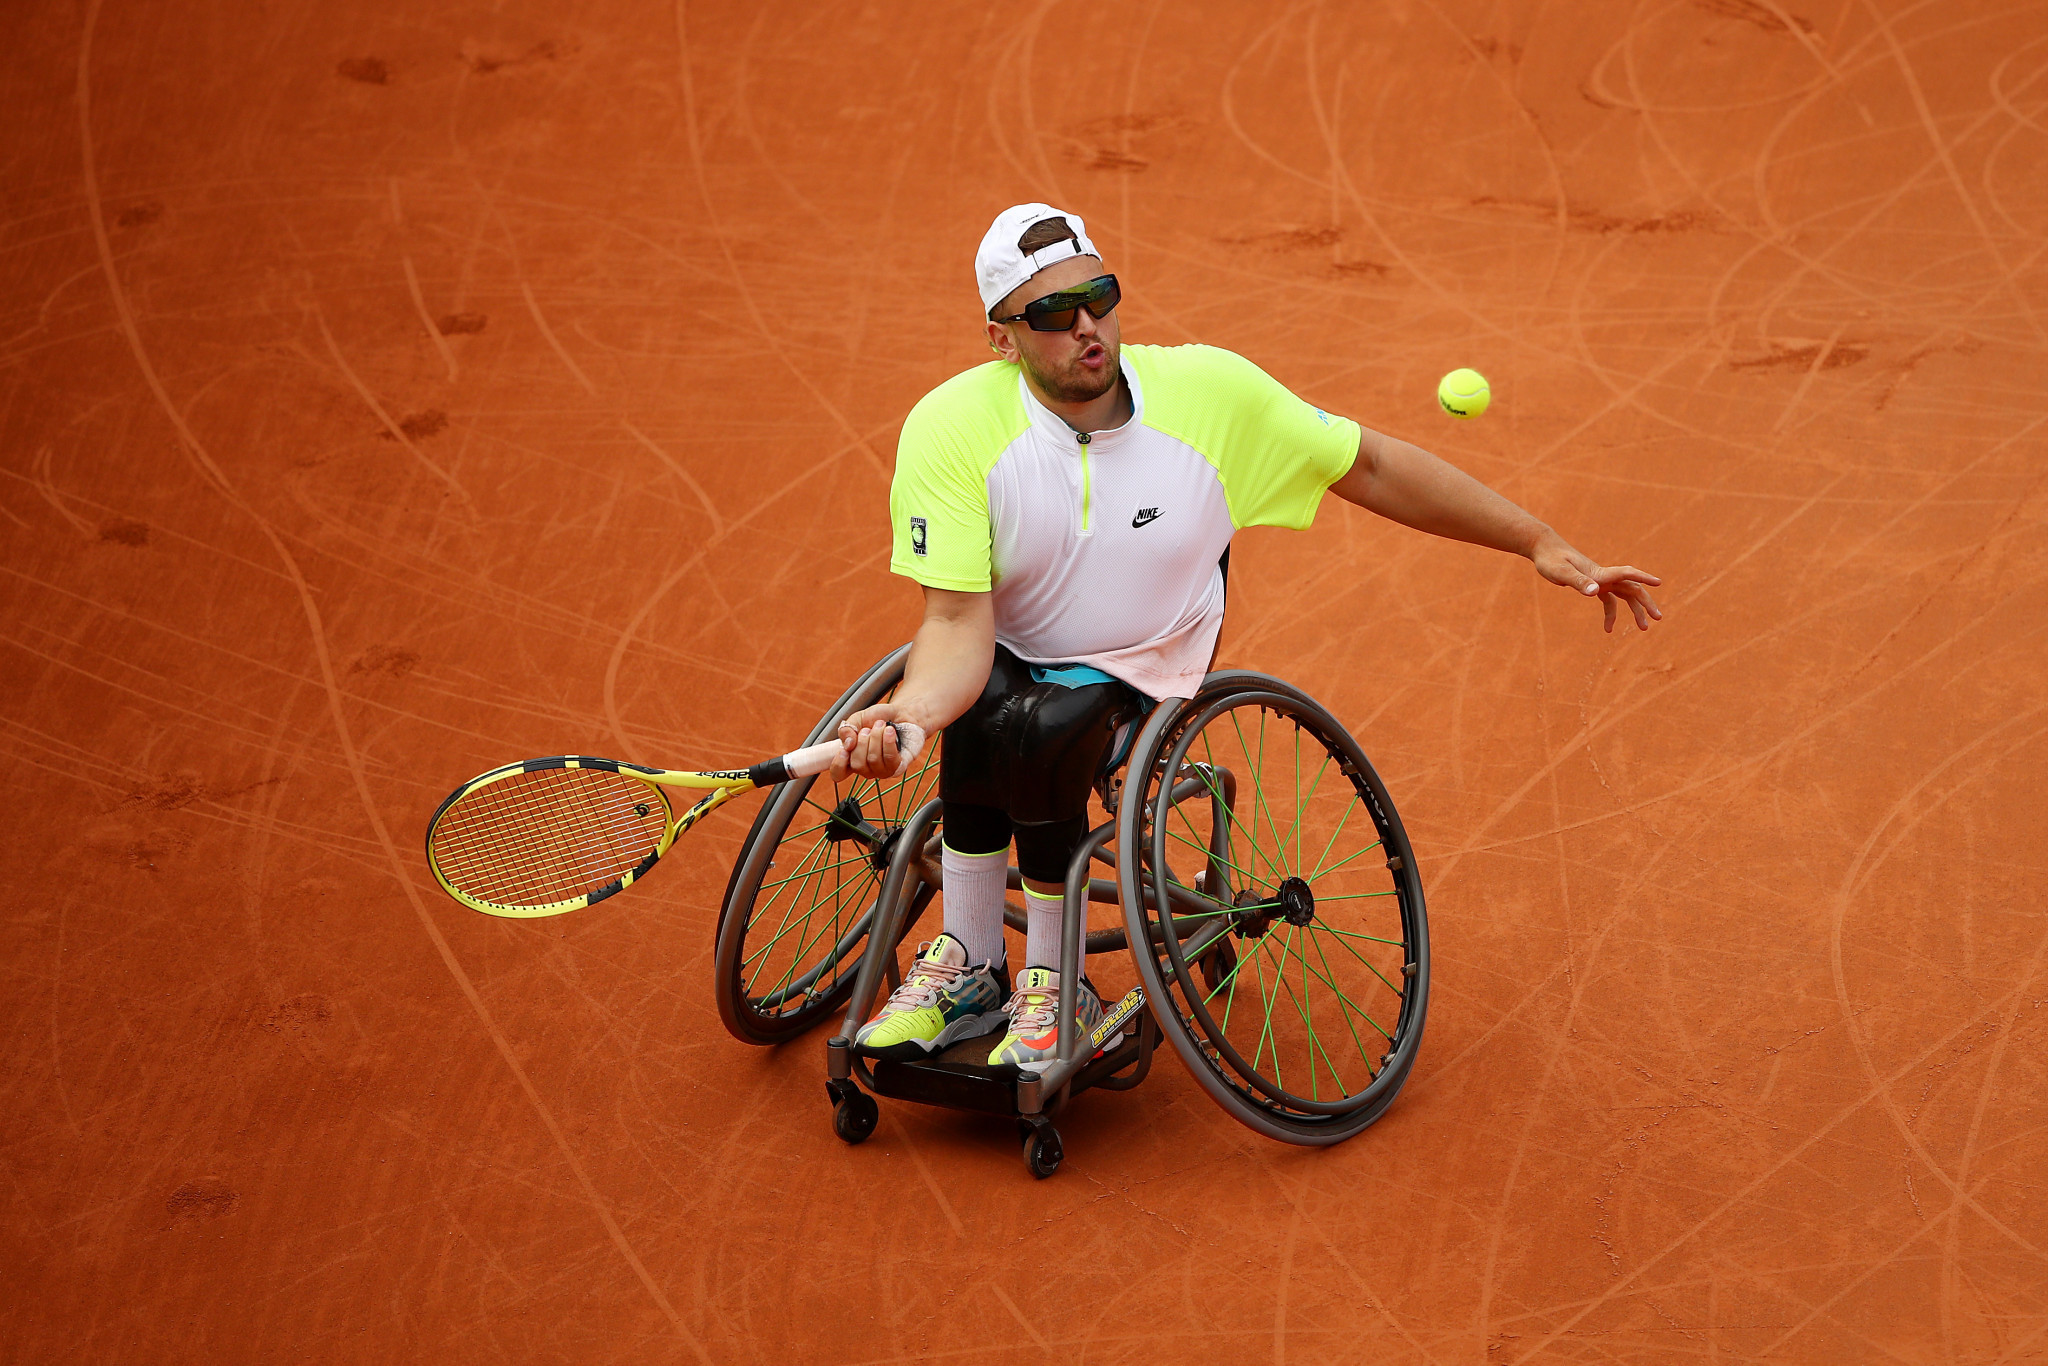 Top seed Dylan Alcott of Australia - a 10-time Grand Slam singles champion - awaits in the final after beating Dutchman Sam Schröder 6-2, 6-4 ©Getty Images